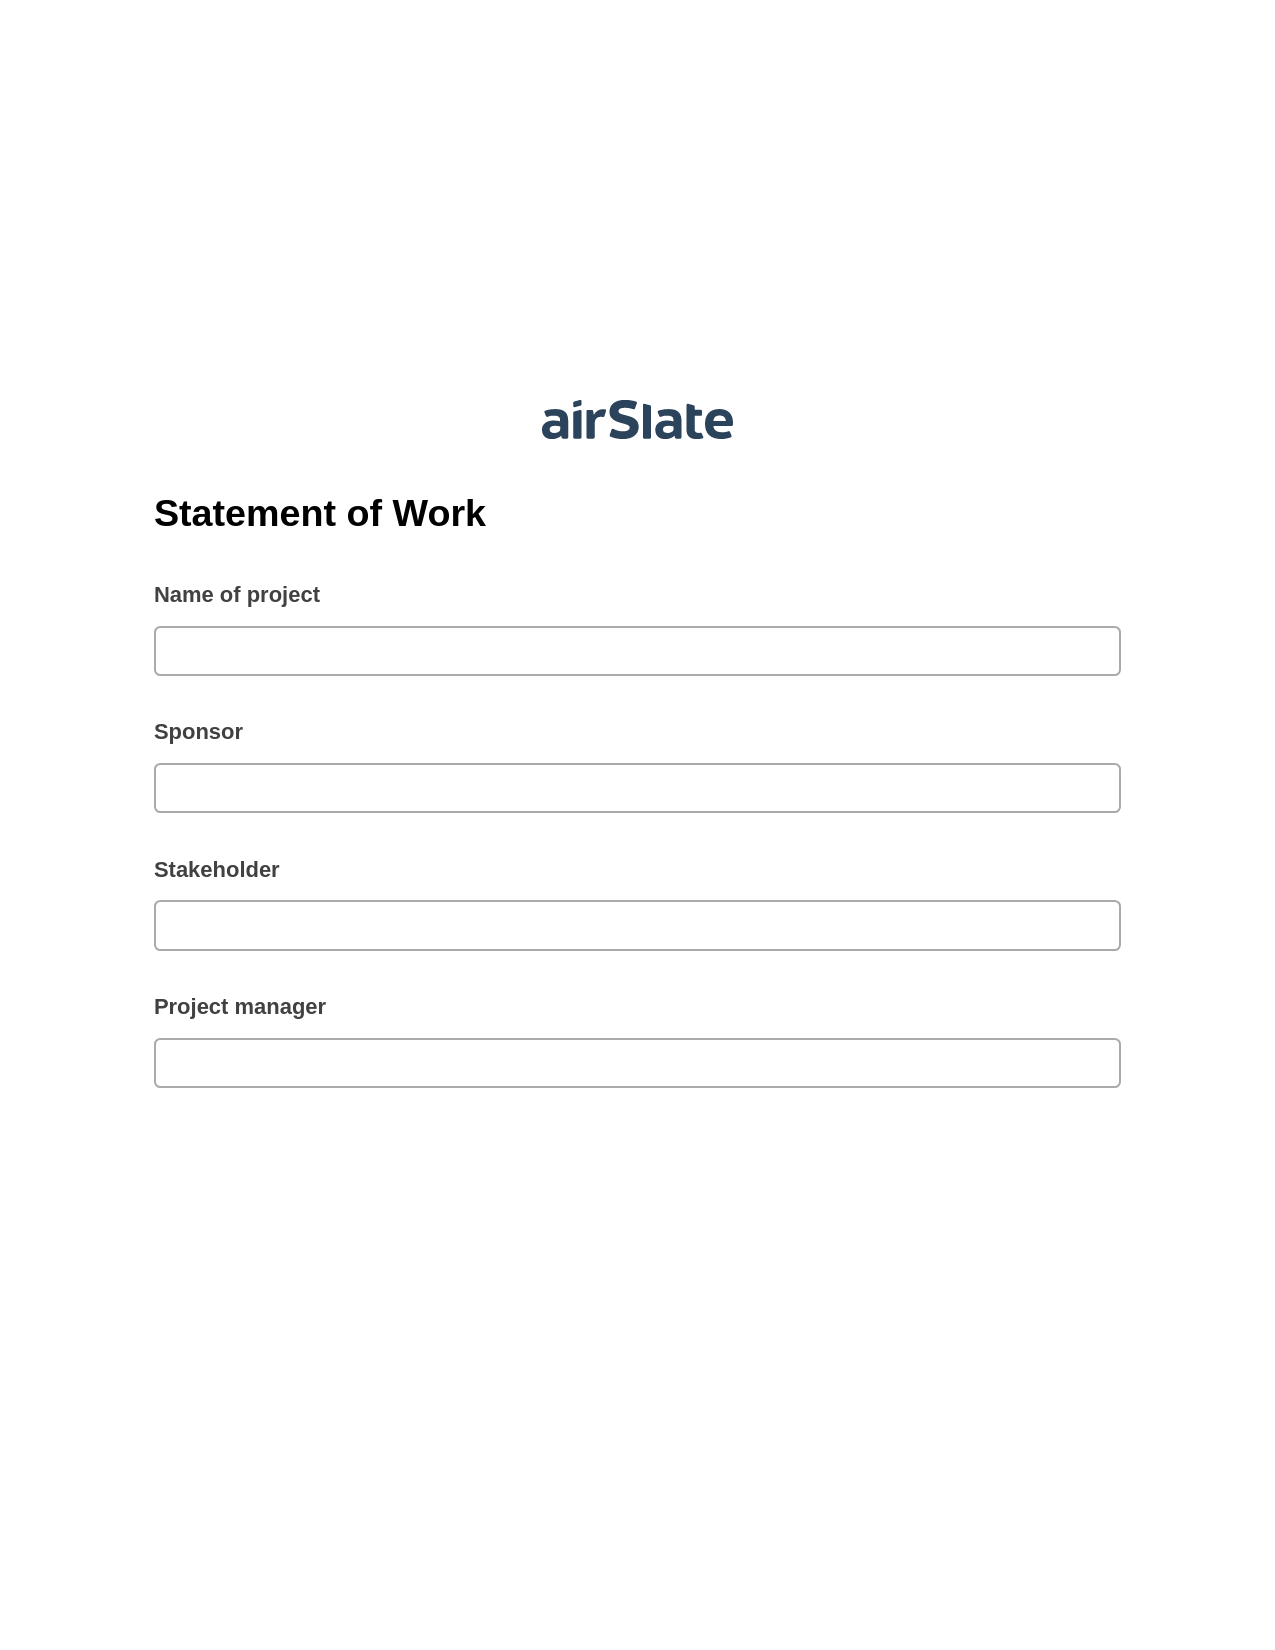 Statement of Work Pre-fill from Google Sheet Dropdown Options Bot, Remove Tags From Slate Bot, Text Message Notification Postfinish Bot